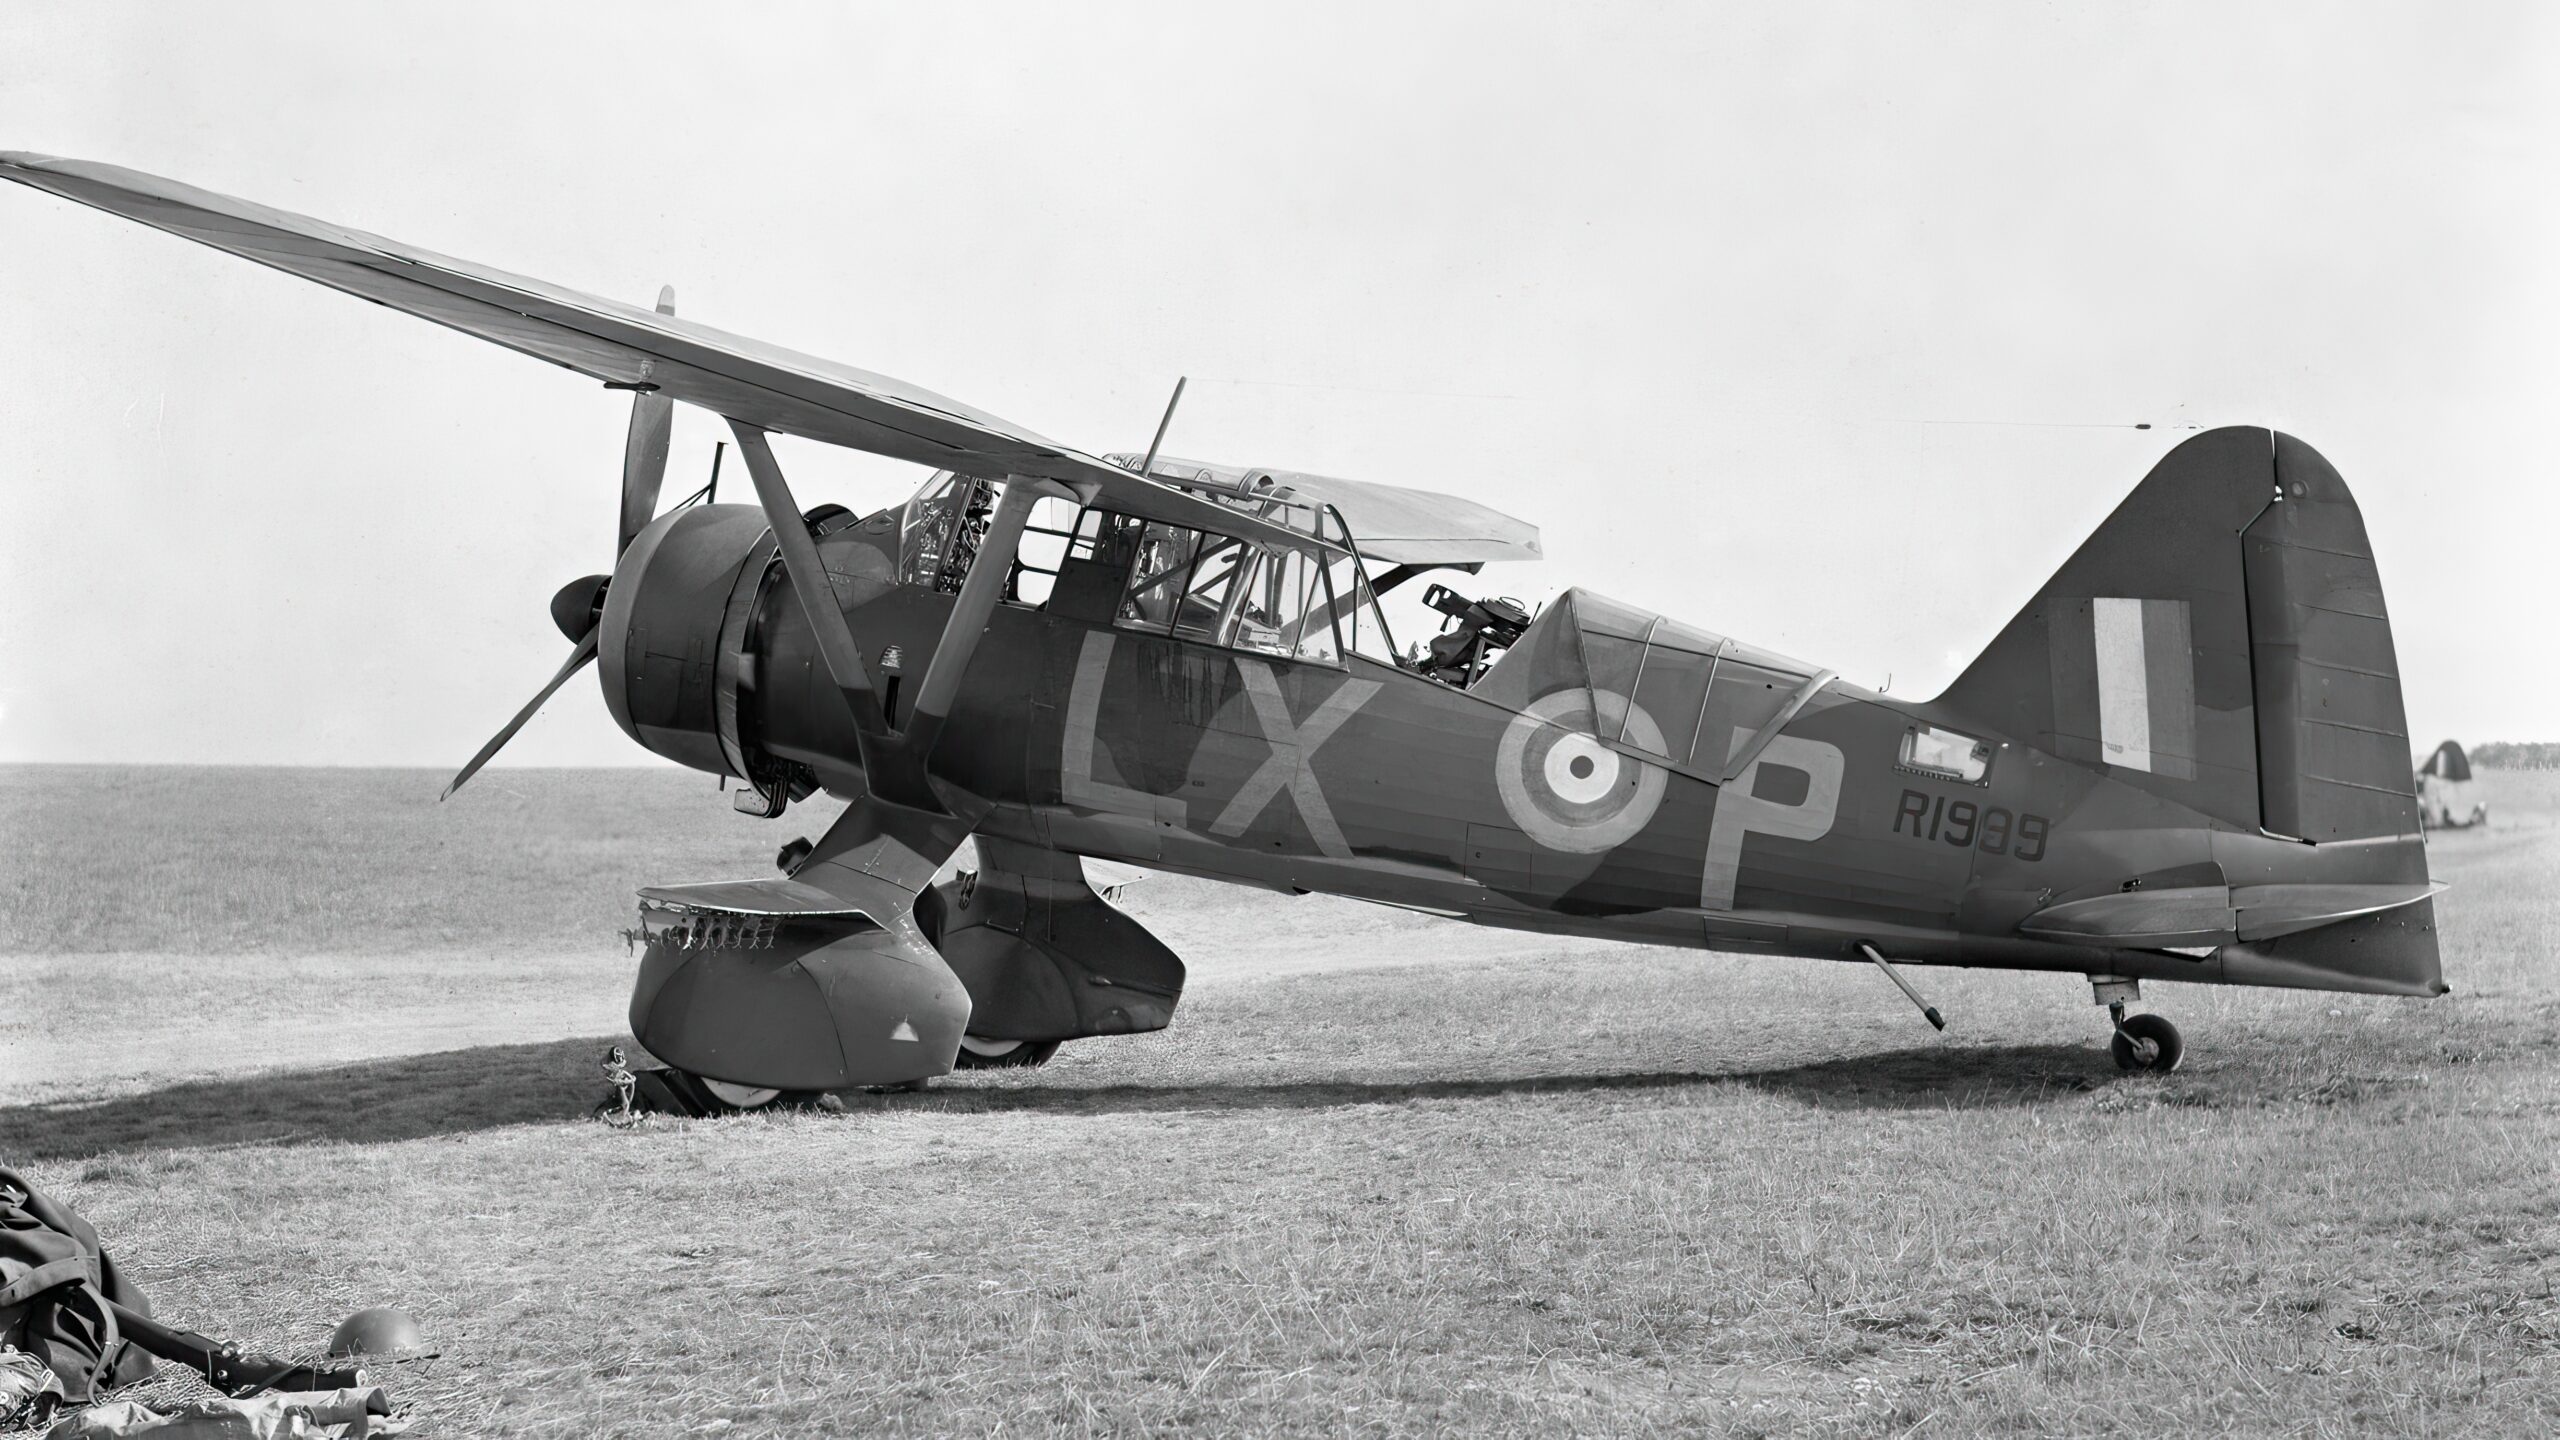 Westland Lysander Mark II, R1999 'LX-P', of No. 225 Squadron RAF, undergoing maintenance at Tilshead, Wiltshire. Note the single Lewis Mark III machine gun on its Fairey mounting in the rear cockpit 1940